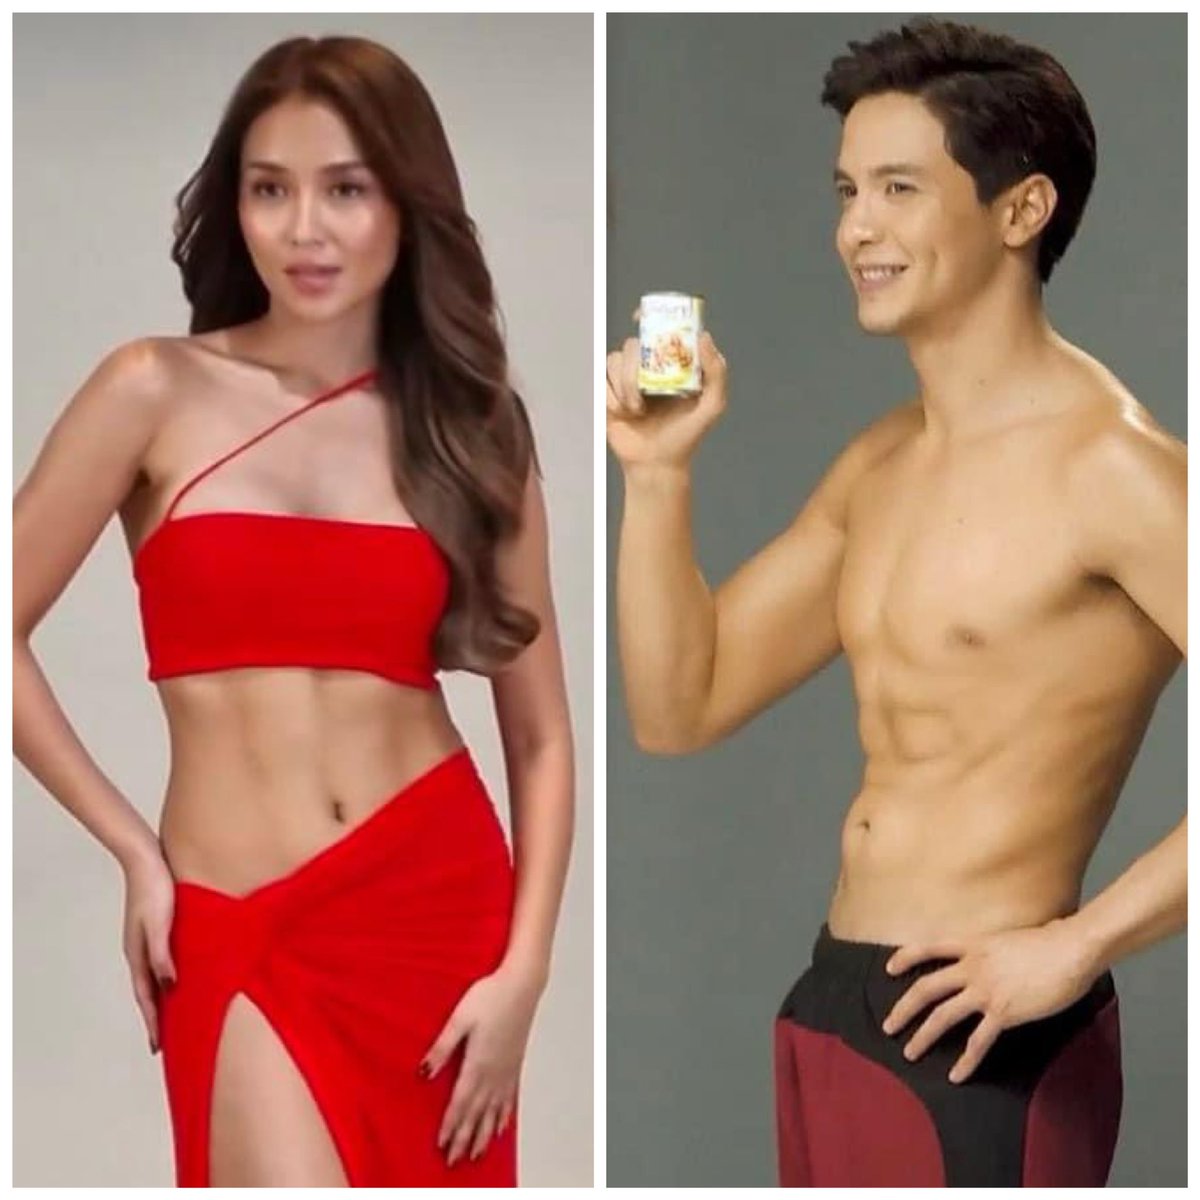 #KathrynBernardo and #AldenRichards are both endorsers of a canned tuna brand, and it looks like more joint endorsements are coming soon as the #Kathden love team is on the rise due to the greenlighting of their dream project (a sequel to #HelloLoveGoodbye).